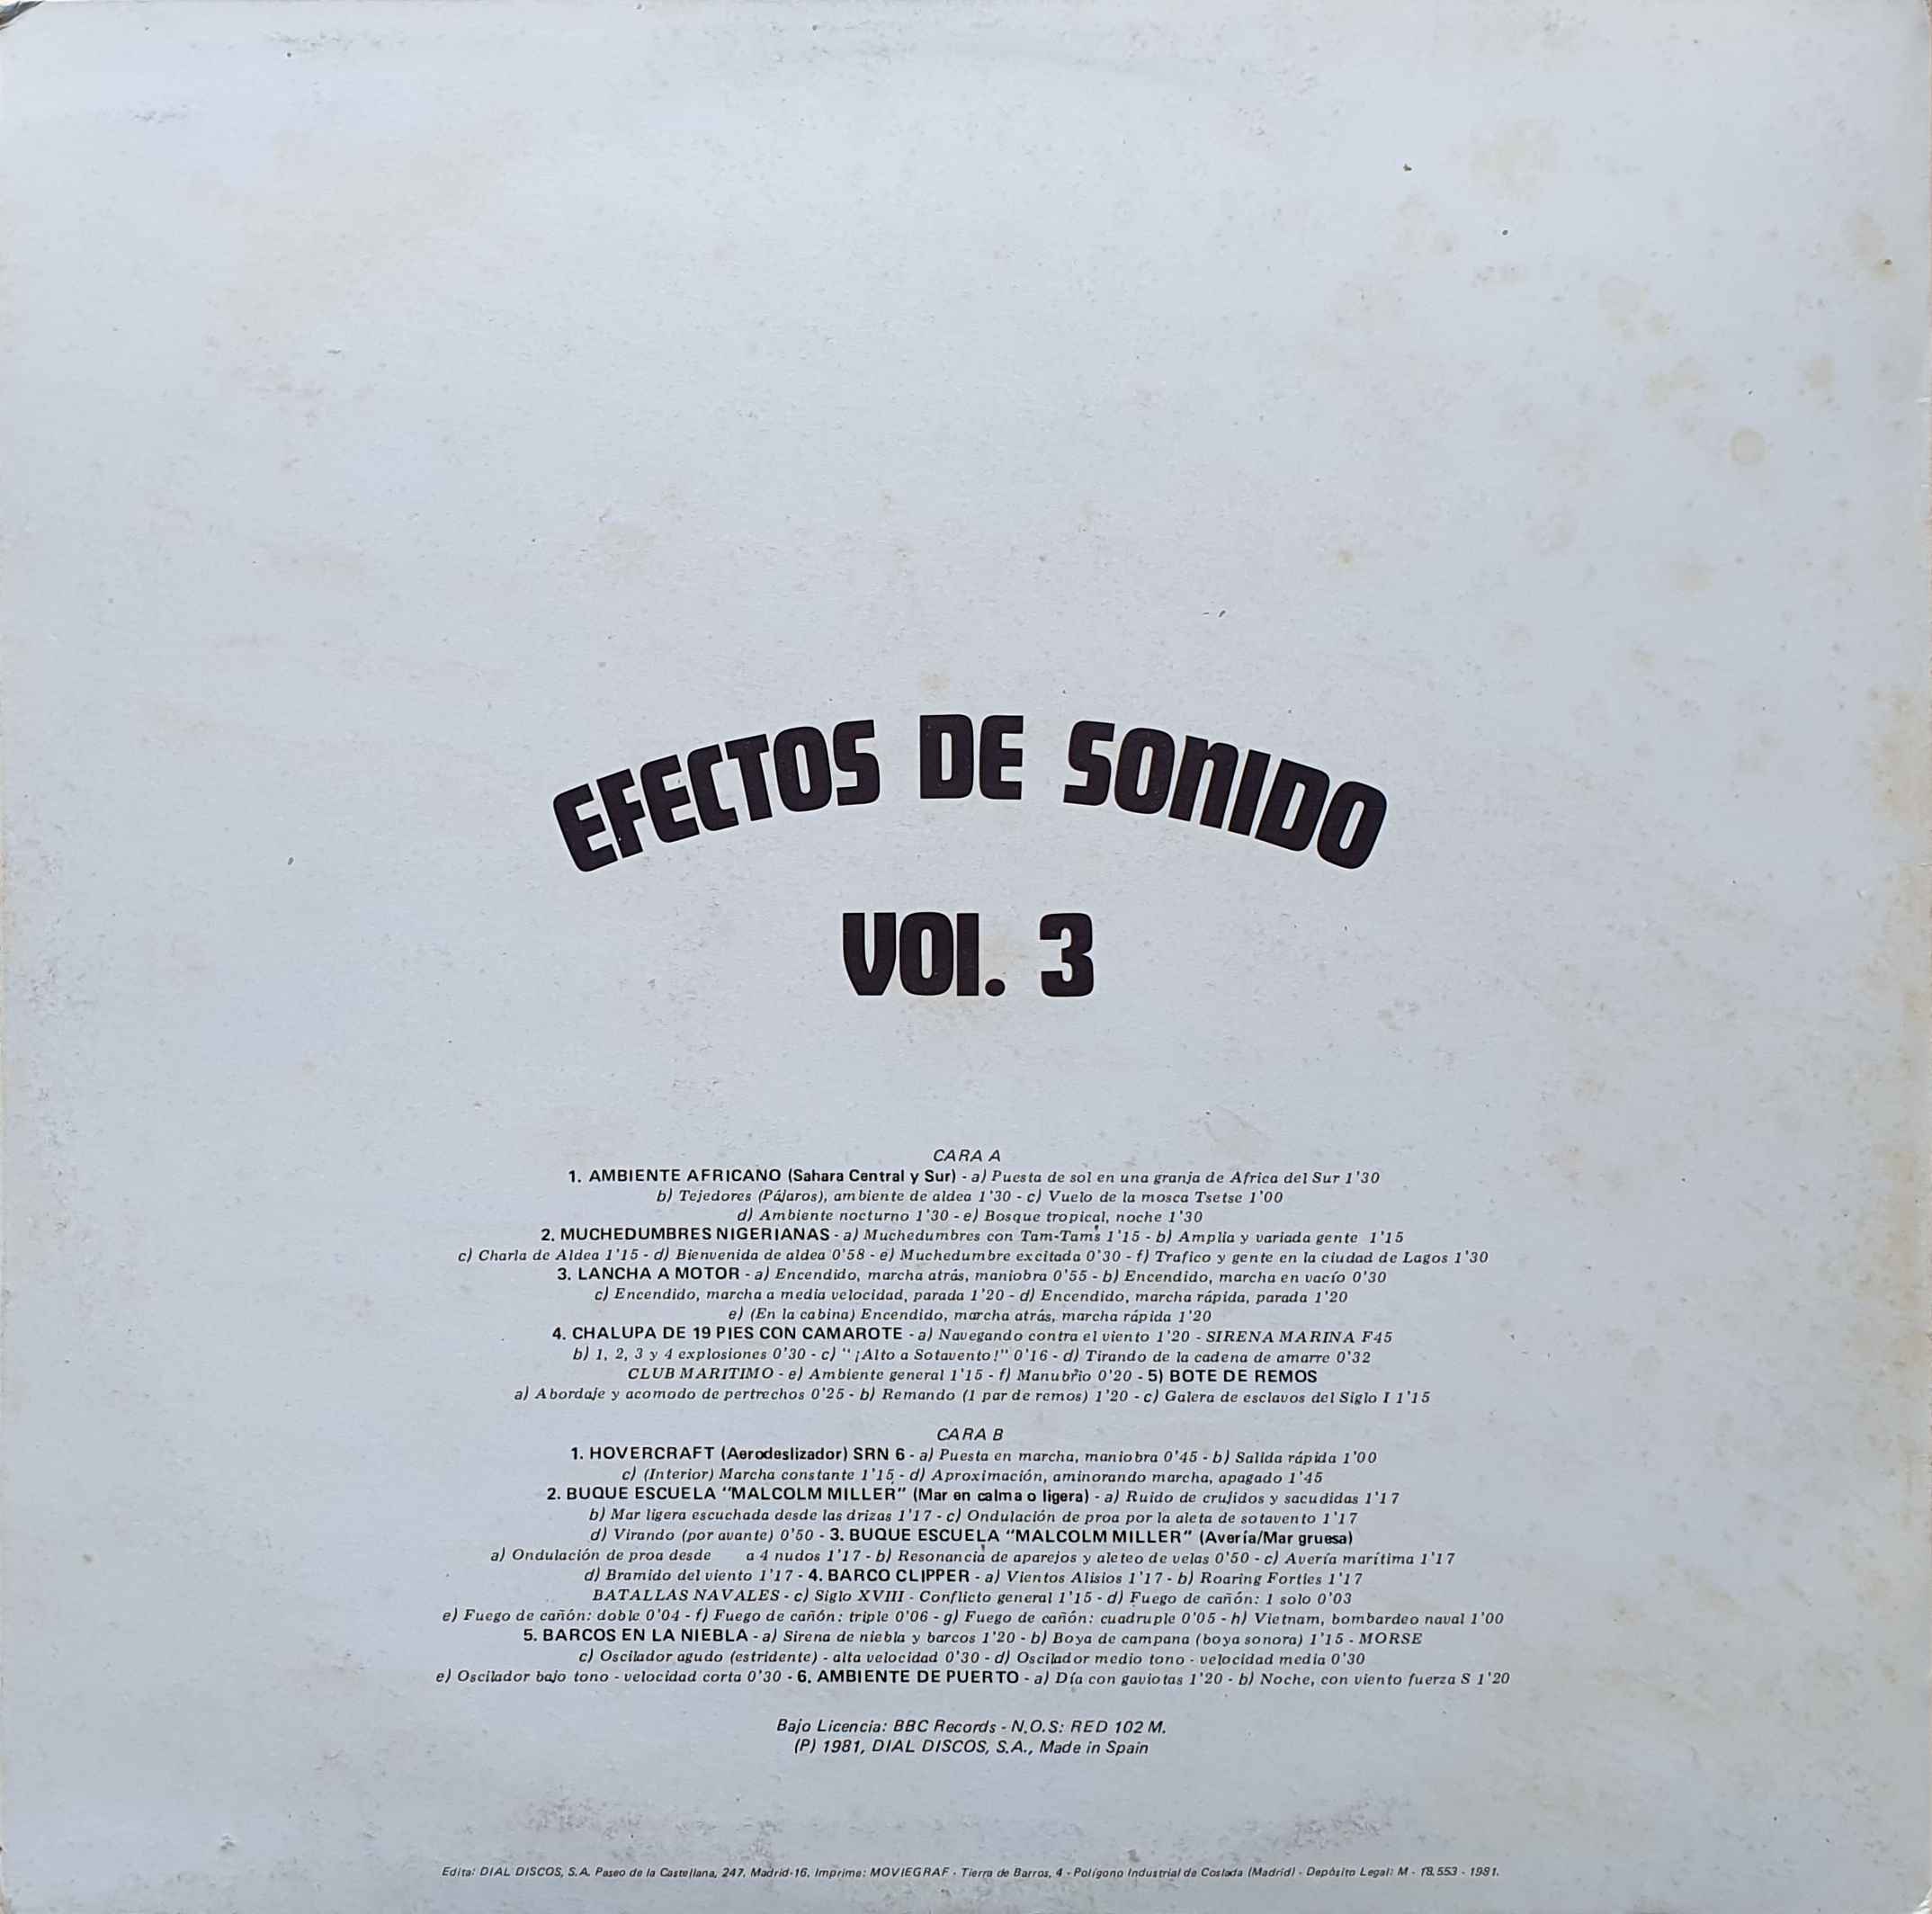 Picture of 51.0107 Efectos de sonido No 3 by artist Various from the BBC records and Tapes library